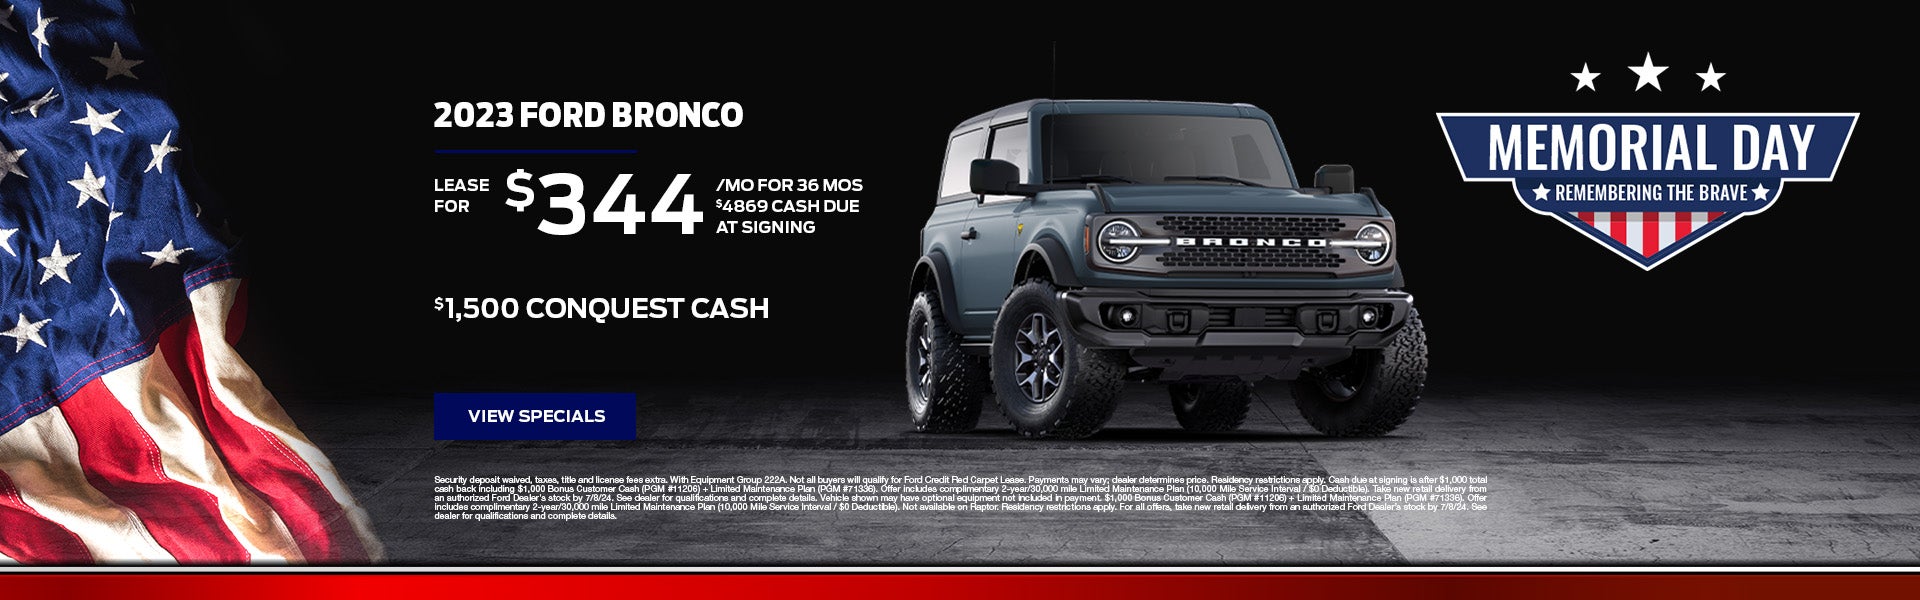 2023 Ford Bronco Special